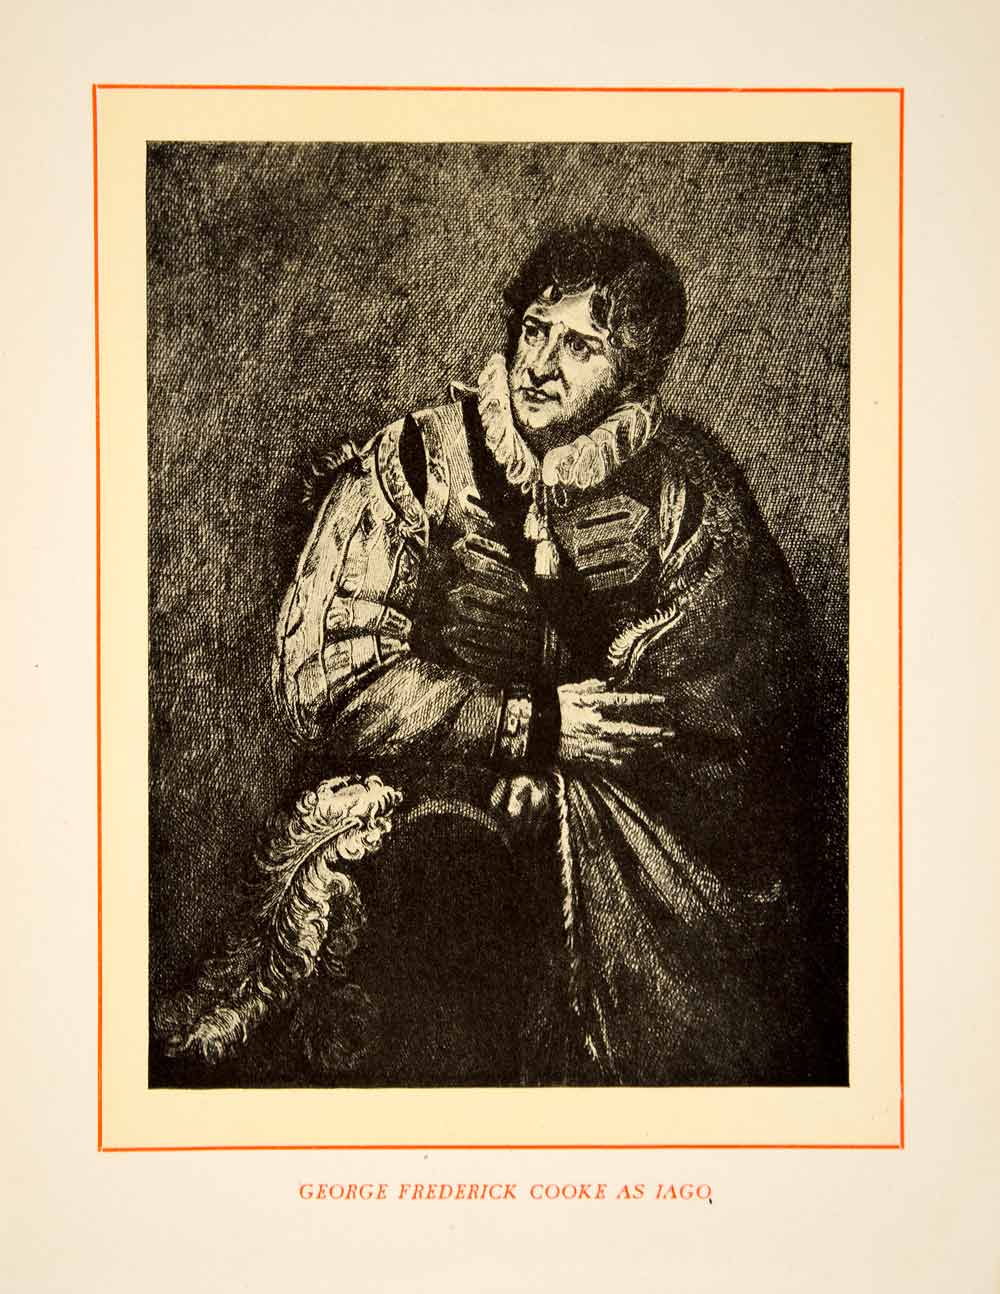 1900 Lithograph Art George Frederick Cooke Actor Iago Othello Shakespeare SRP1